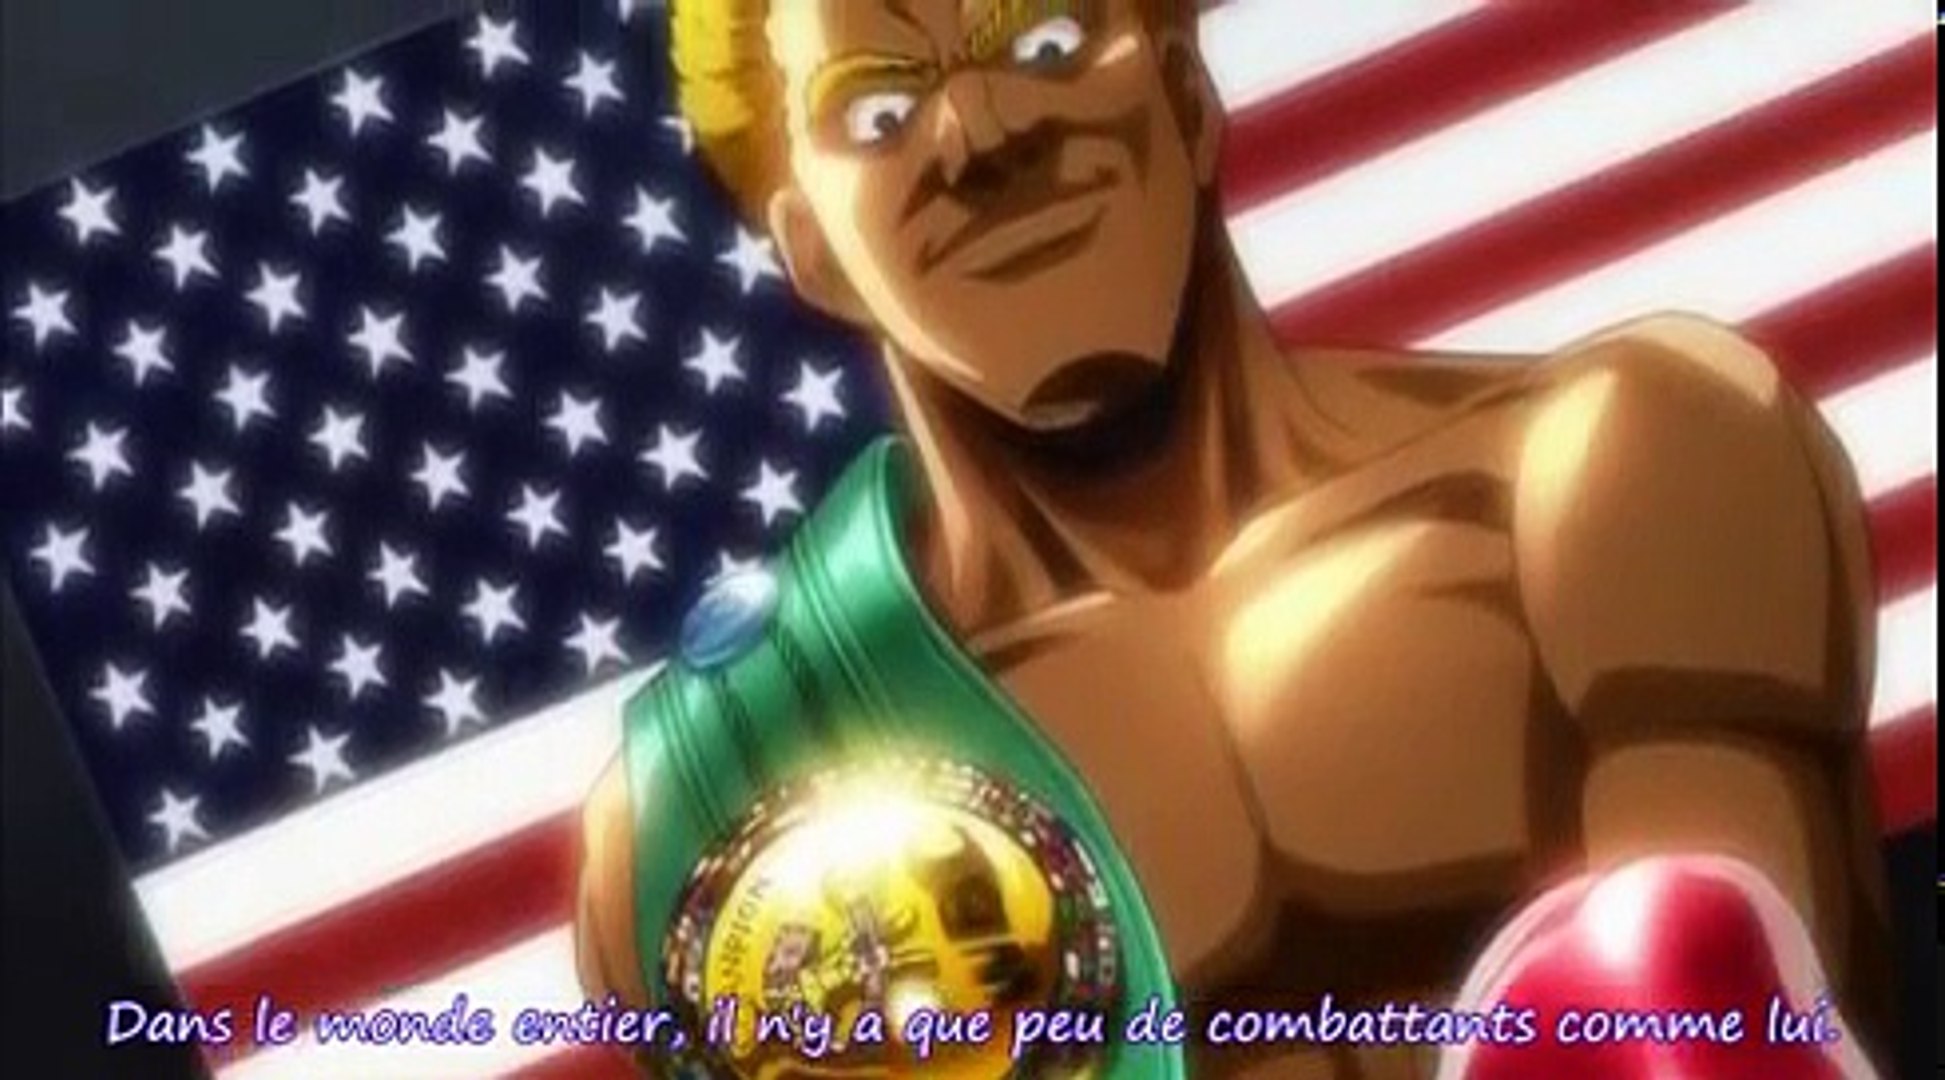 Hajime no Ippo - New Challenger - Ep15 HD Watch - video Dailymotion